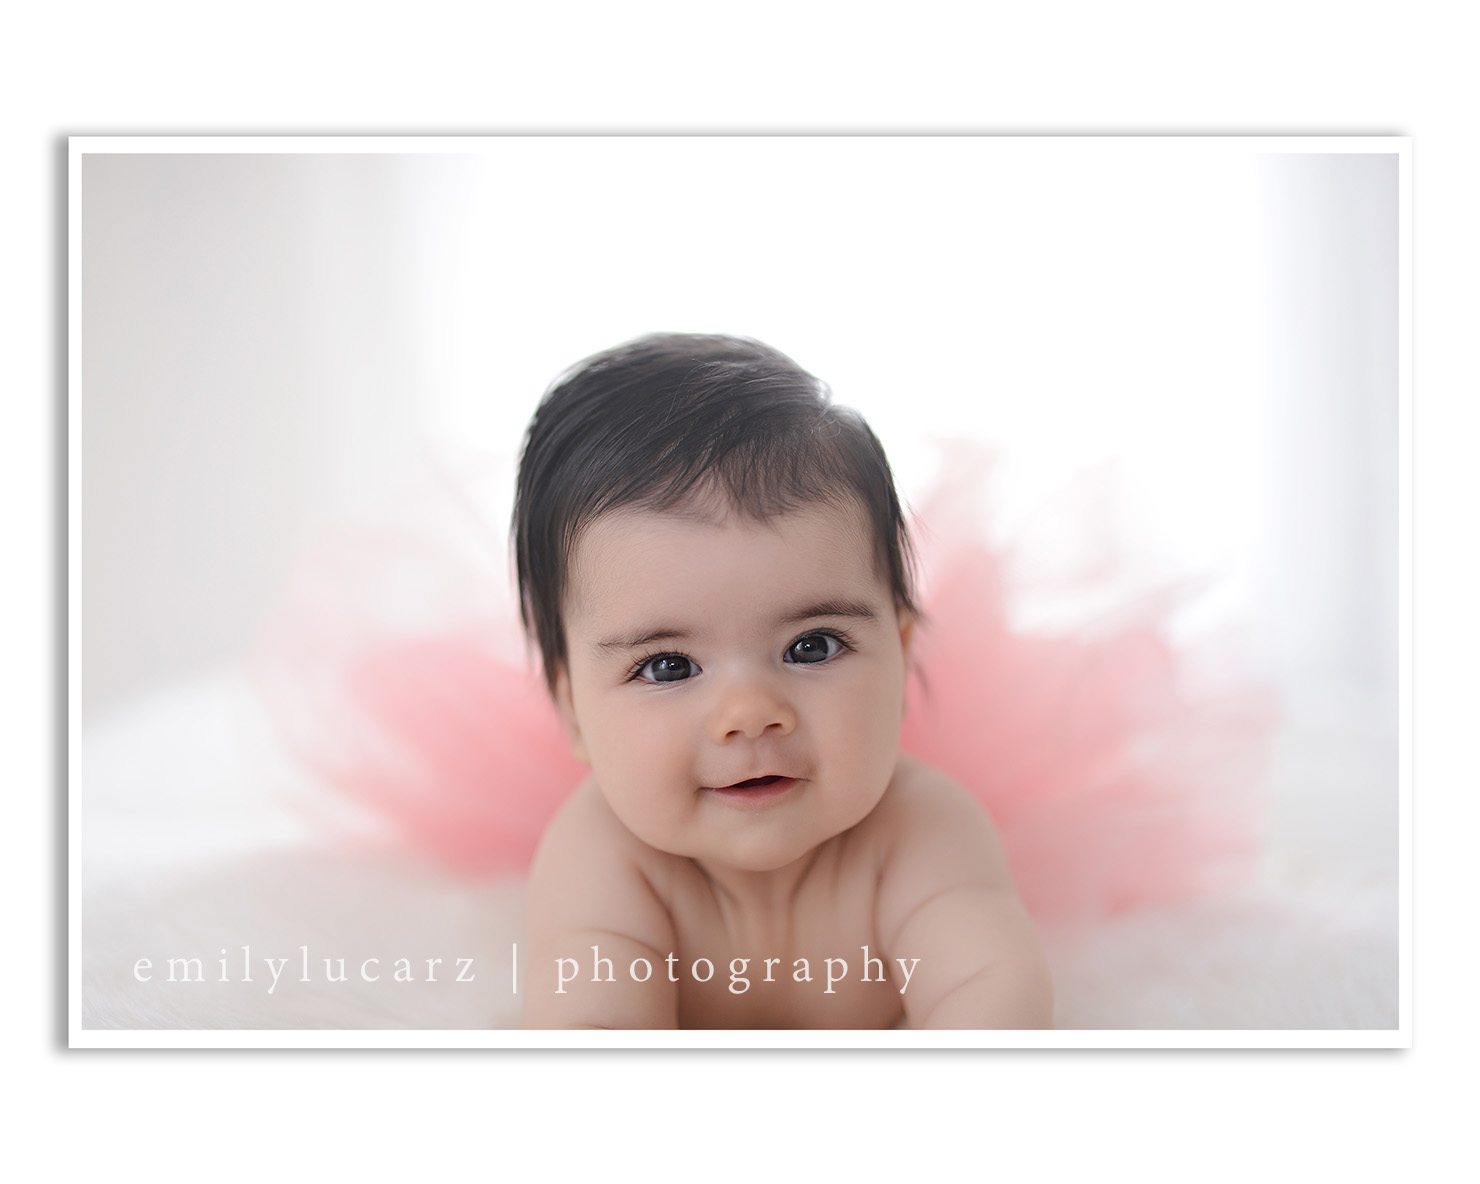 A darling 4 month old girl who had her photo taken in a yellow dress for a baby photography session in St. Louis MO